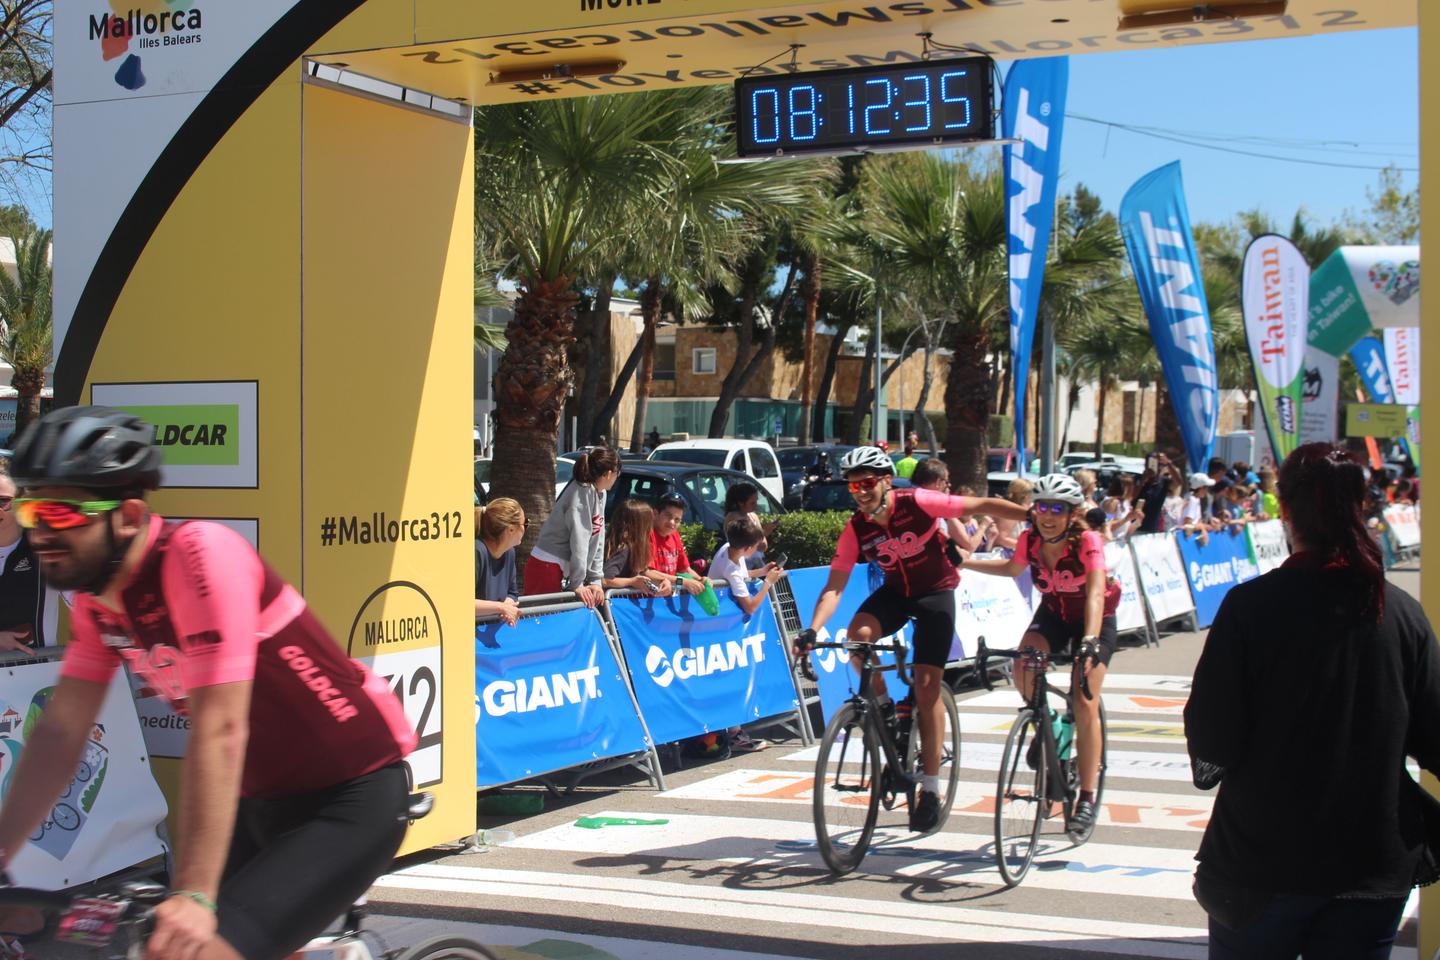 Cyclists crossing the finish line of the Mallorca 312 race, with spectators and a large digital timer overhead.